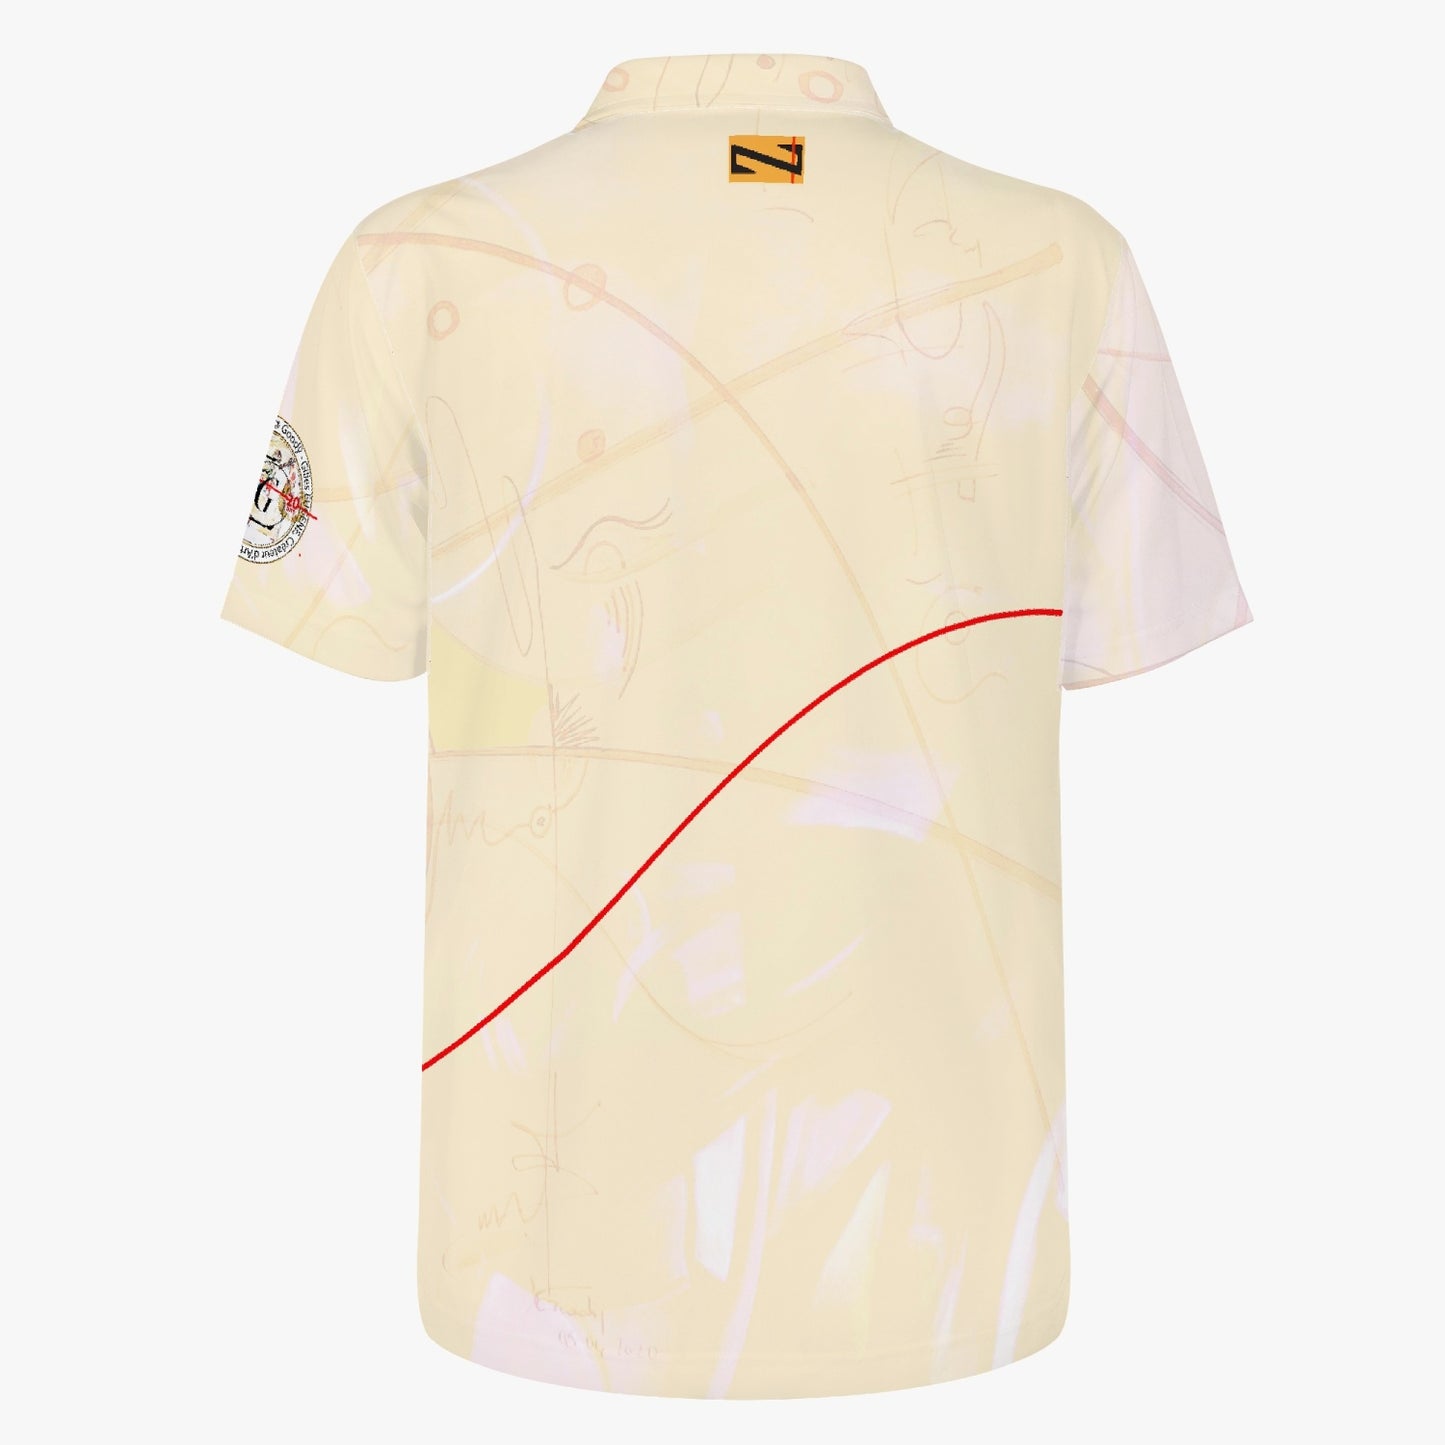 All-over "Marquerouge" polo shirt